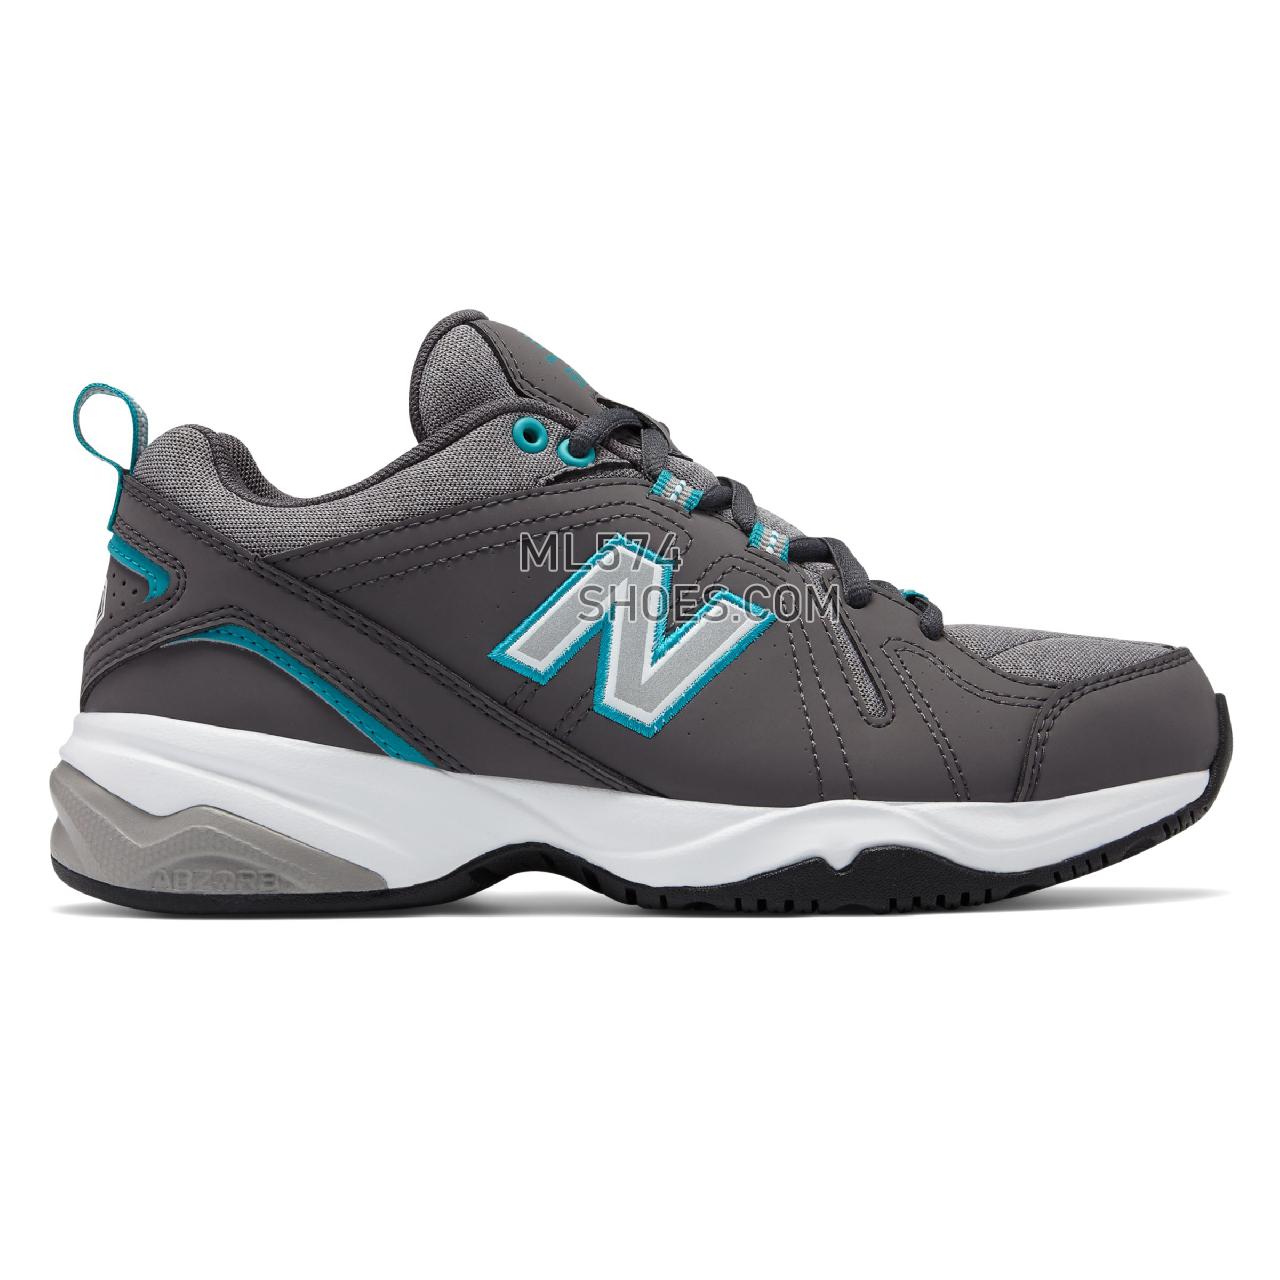 New Balance Womens 608v4 - Women's 608 - X-training Grey with Teal - WX608HH4